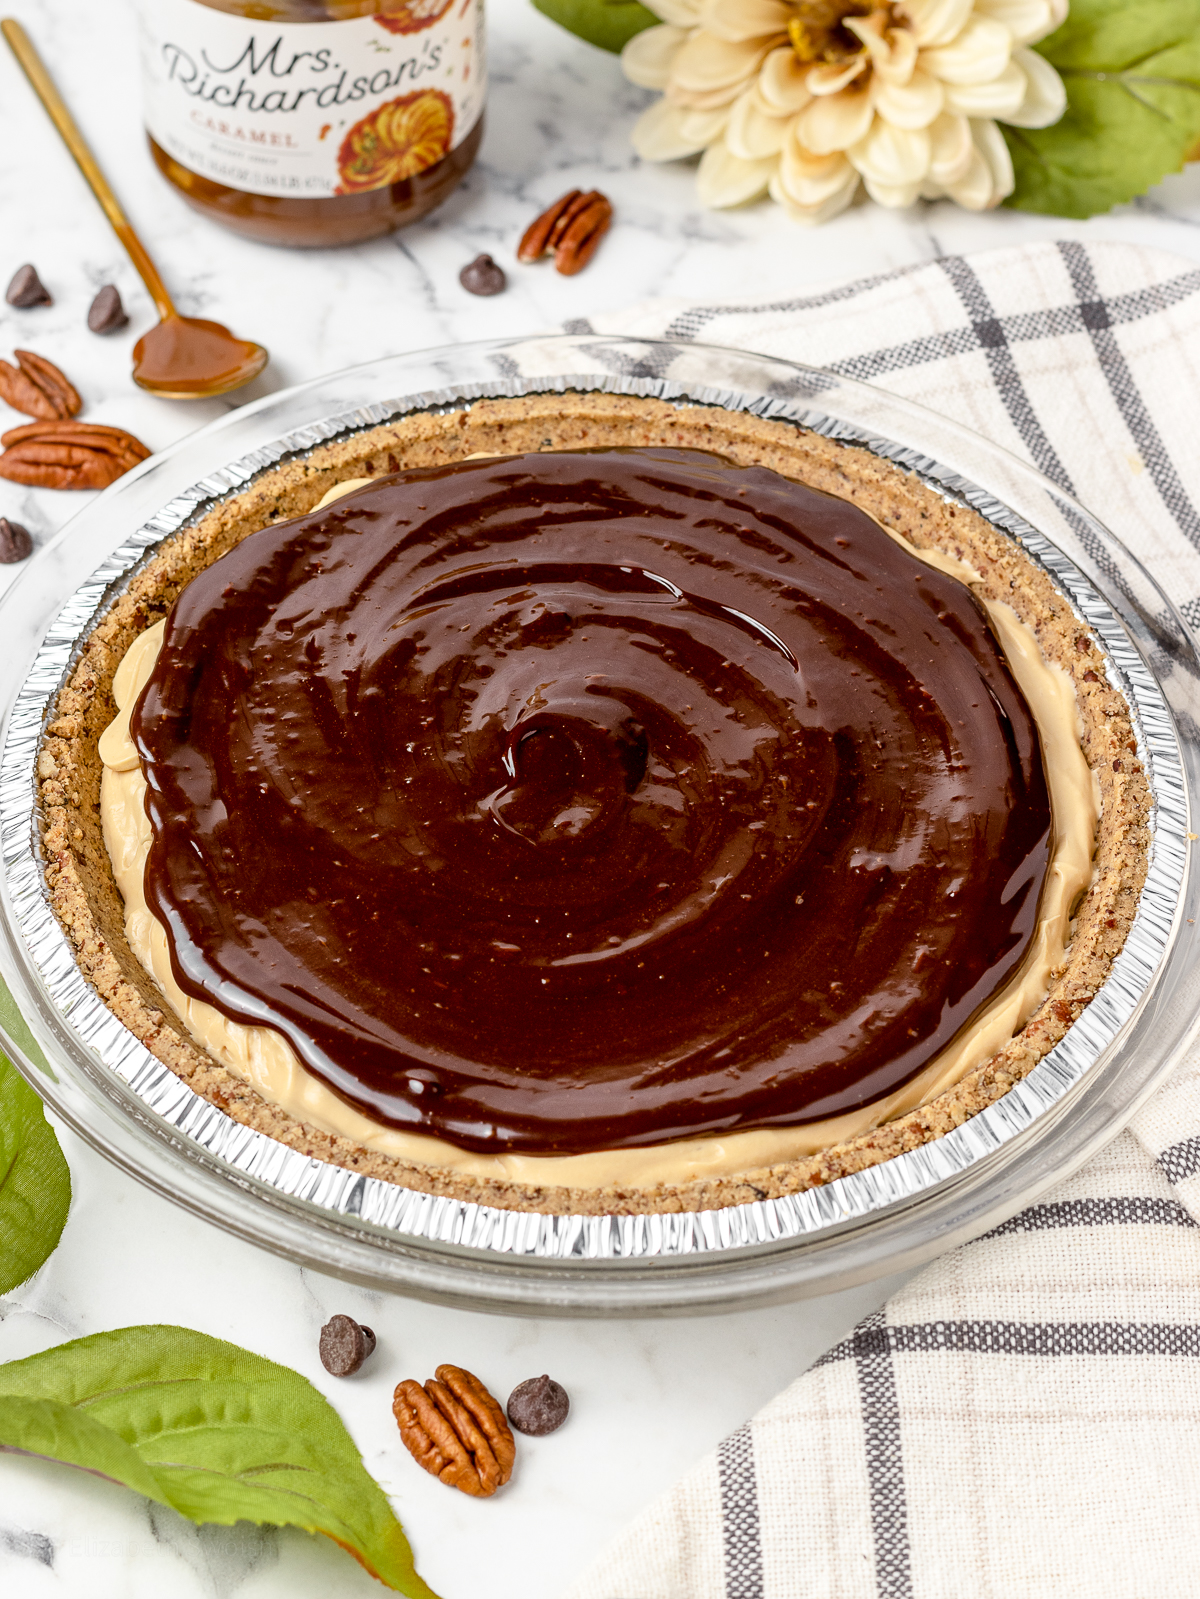 Smooth swirl of chocolate ganache on top of the pie. Pecan halves and caramel sauce on the side.